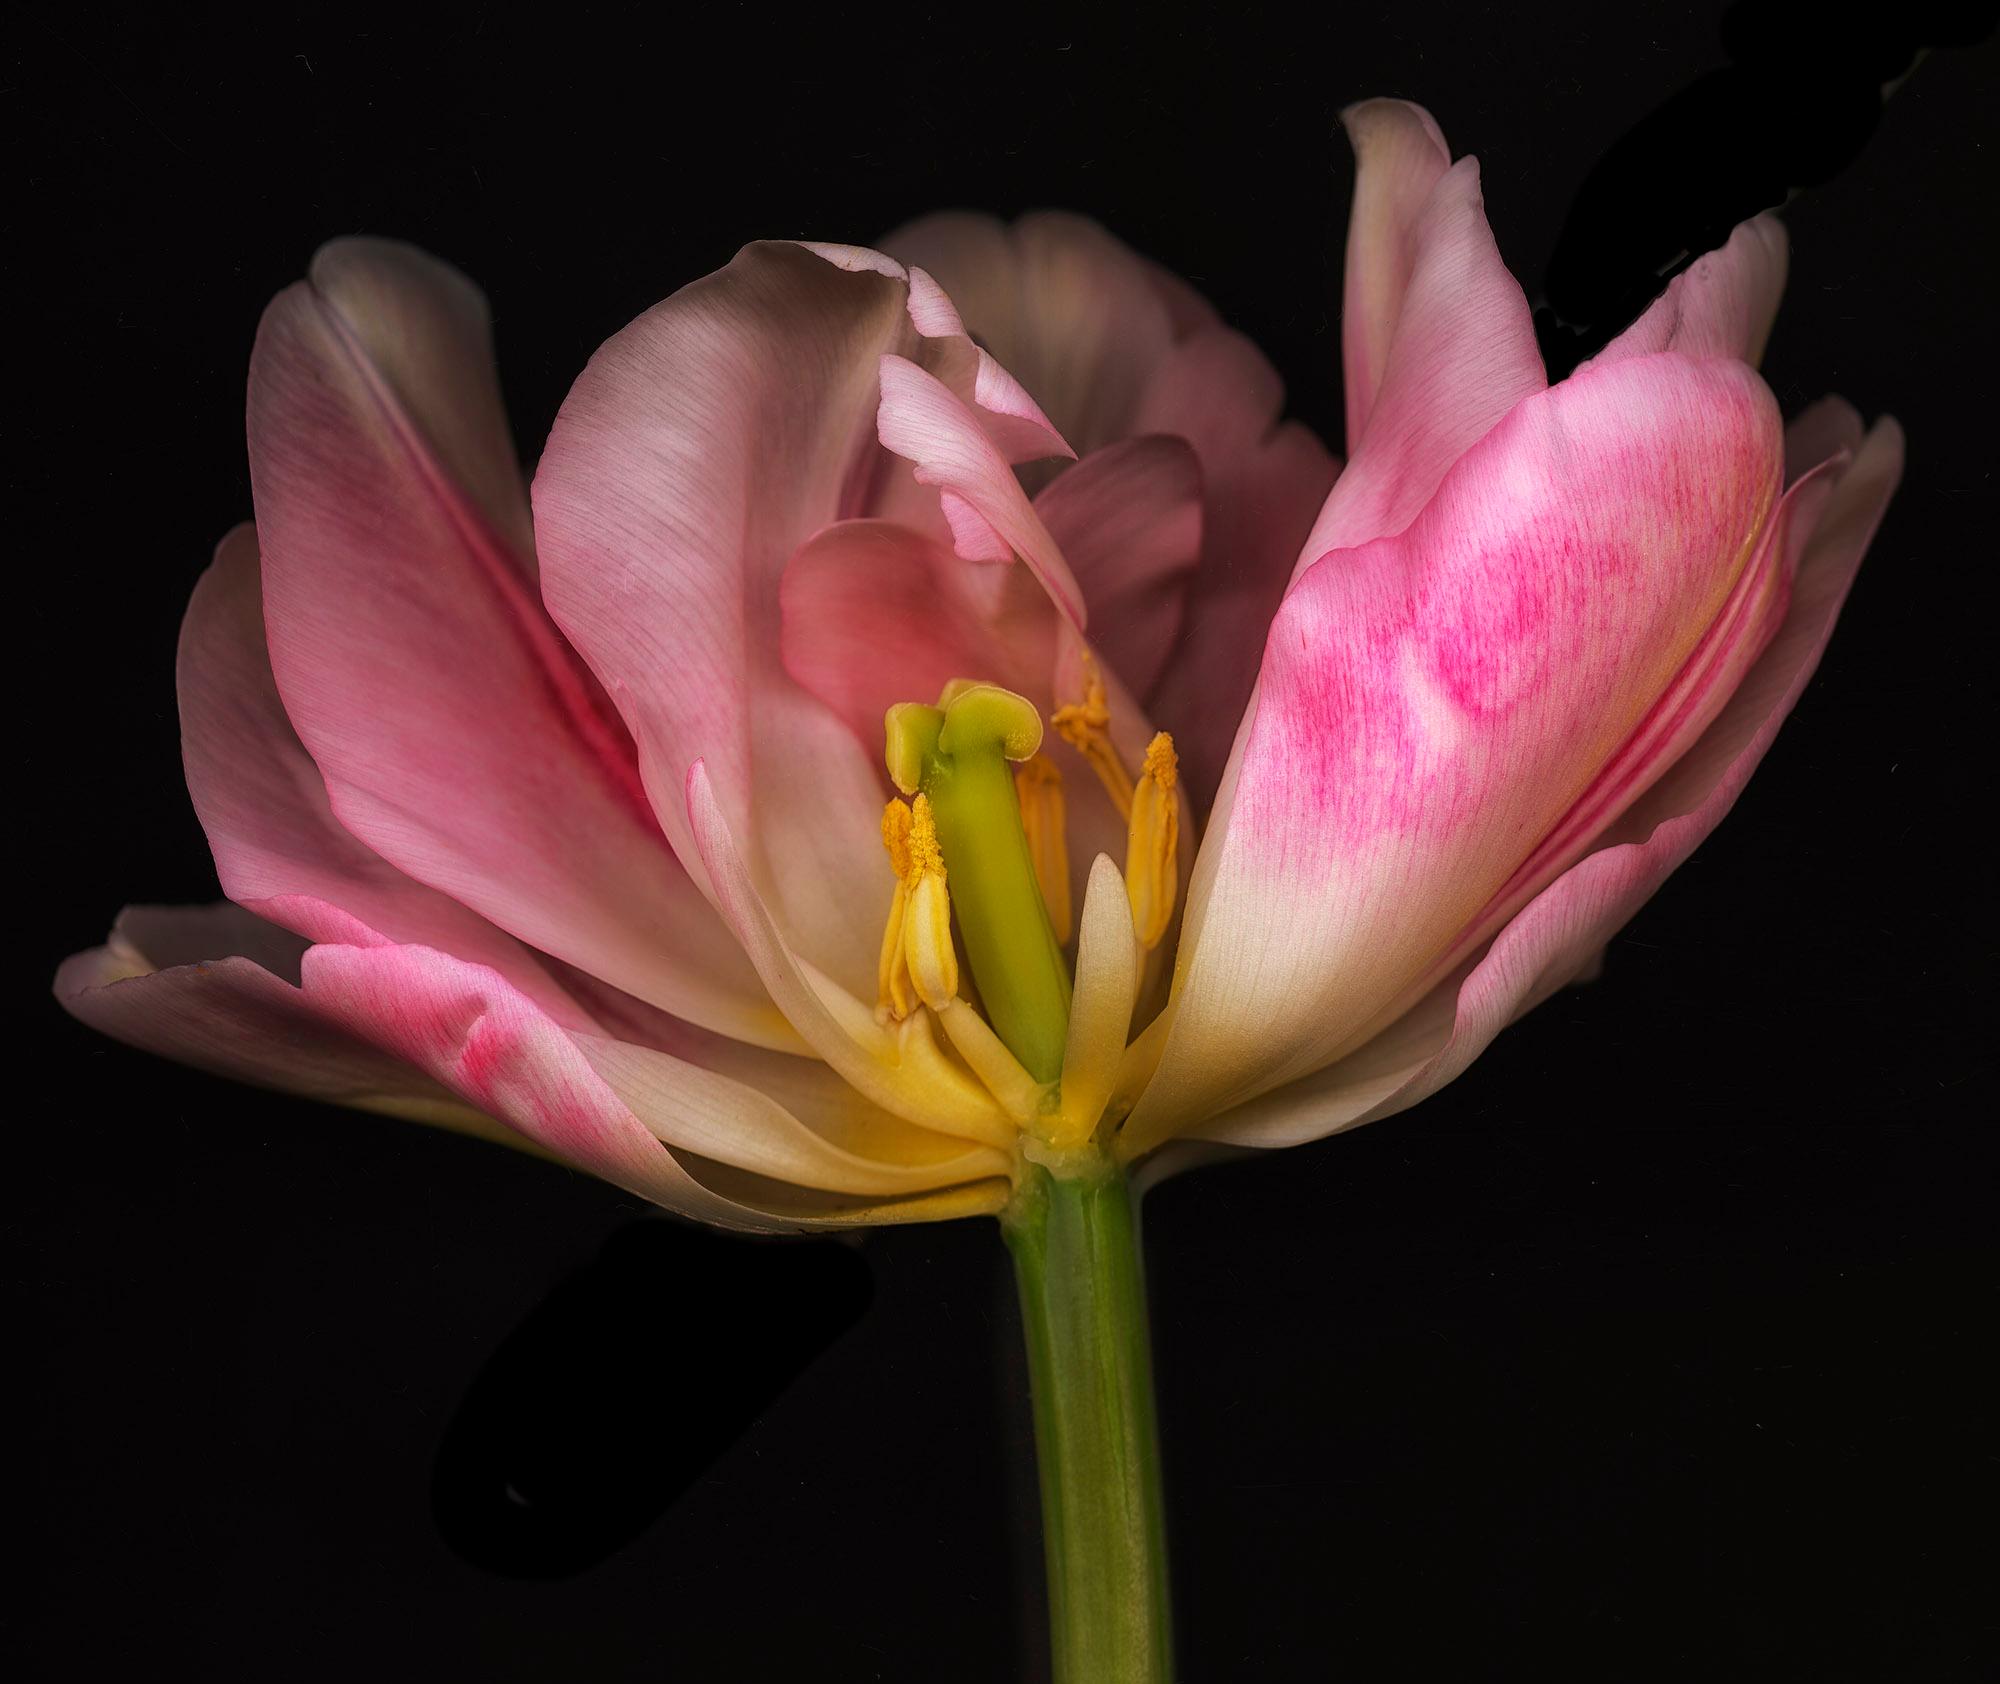 Allan Forsyth Color Photograph - Ghost Flower No 8, floral photography, pink art, limited edition print